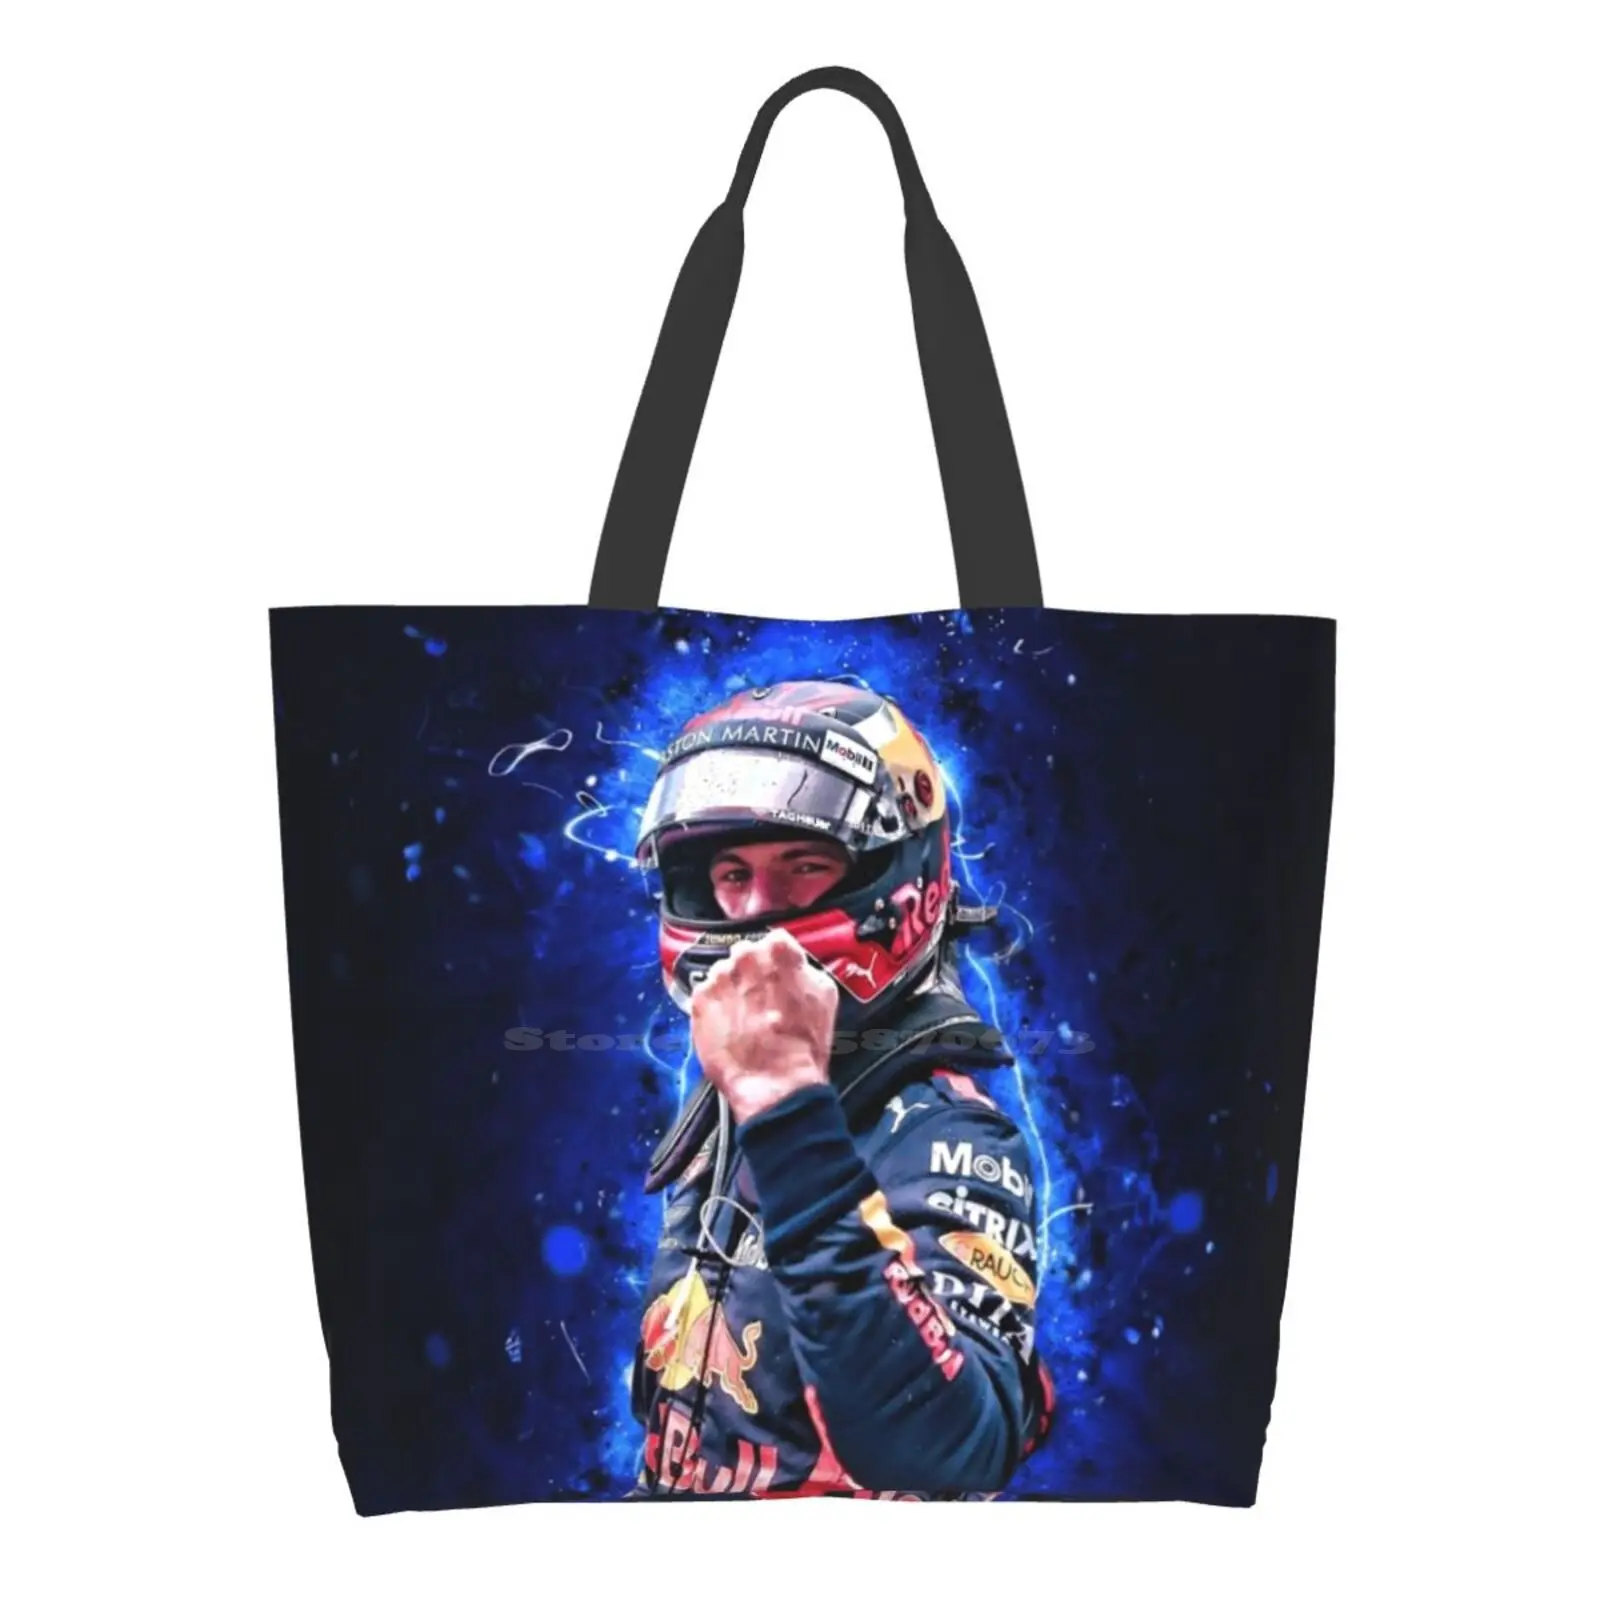 

Designer Handbags Shopping Tote Mad Mad Max Young Promise 2019 Quick Formulate 1 Mobile Cases Vettel Ayrton Senna Senna Tribute